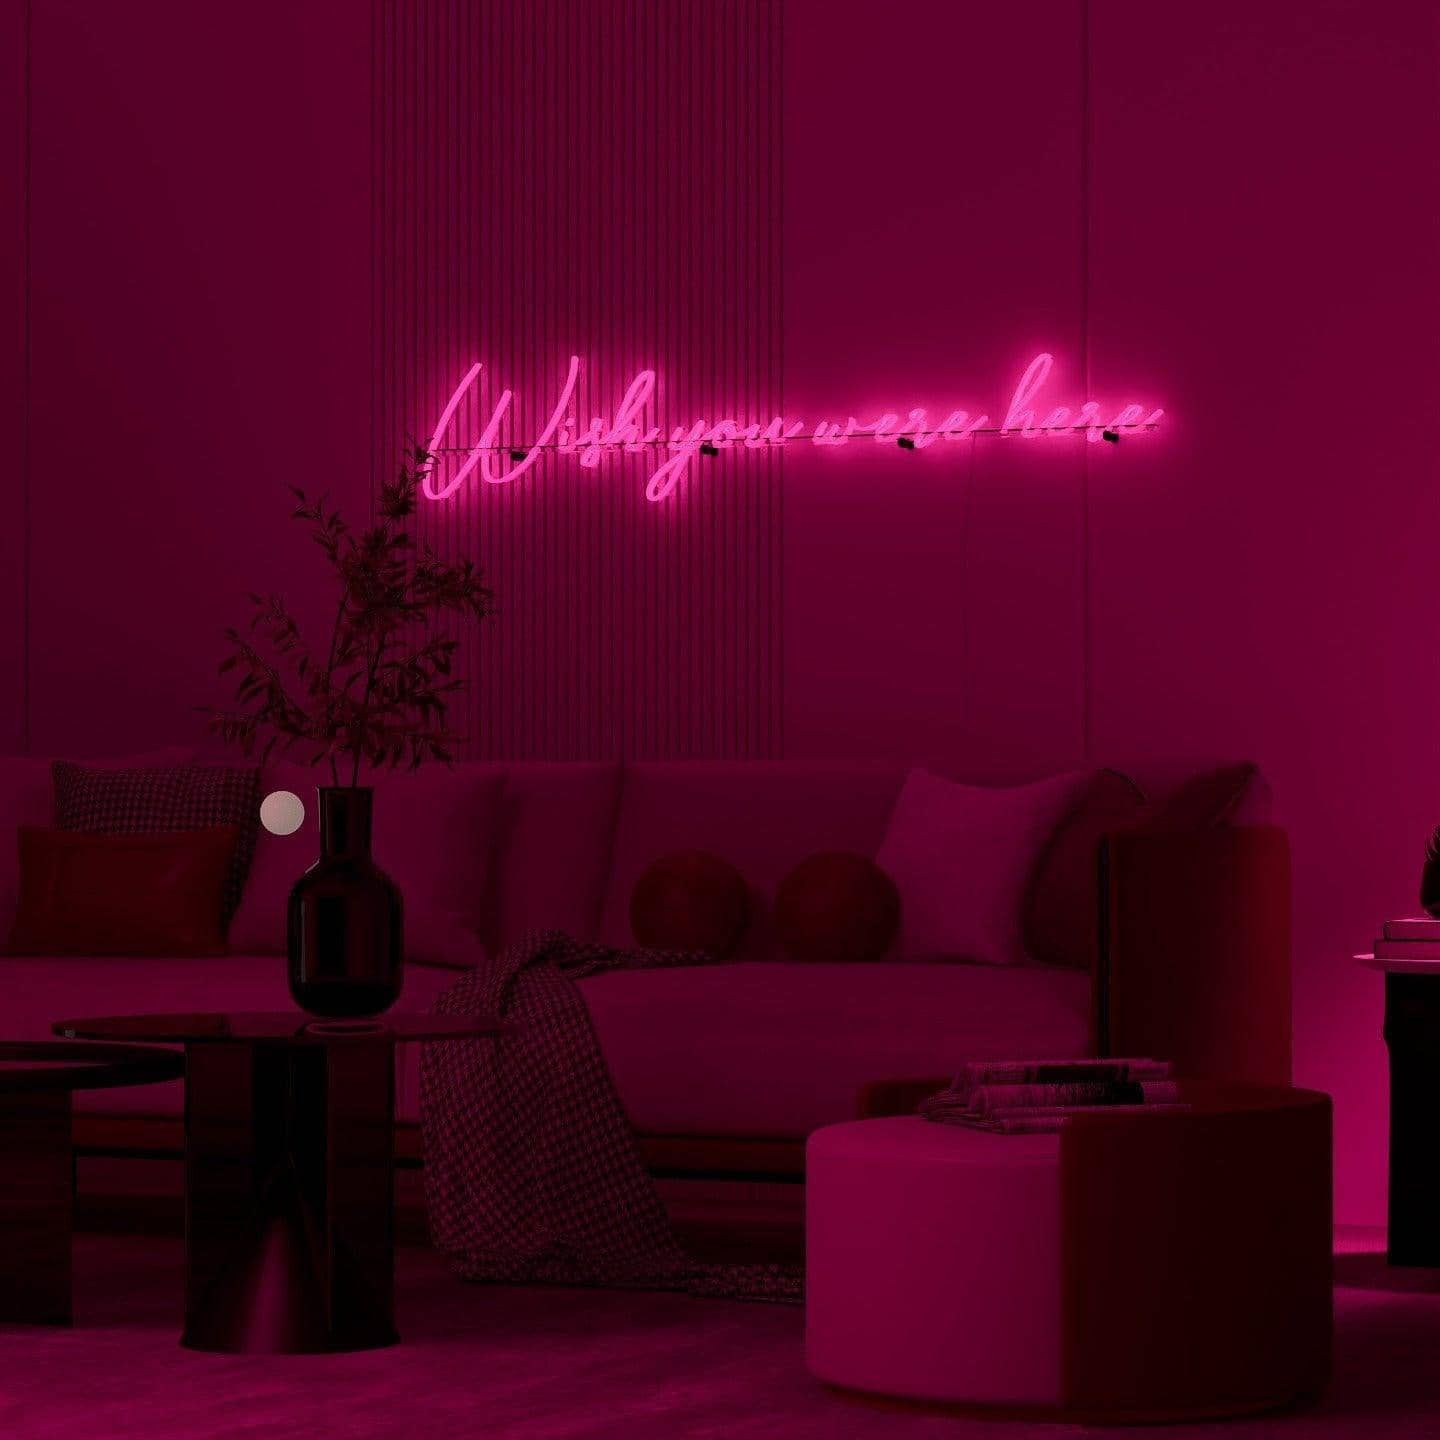 light-up-pink-neon-lights-hanging-on-wall-at-night-wish-you-were-here